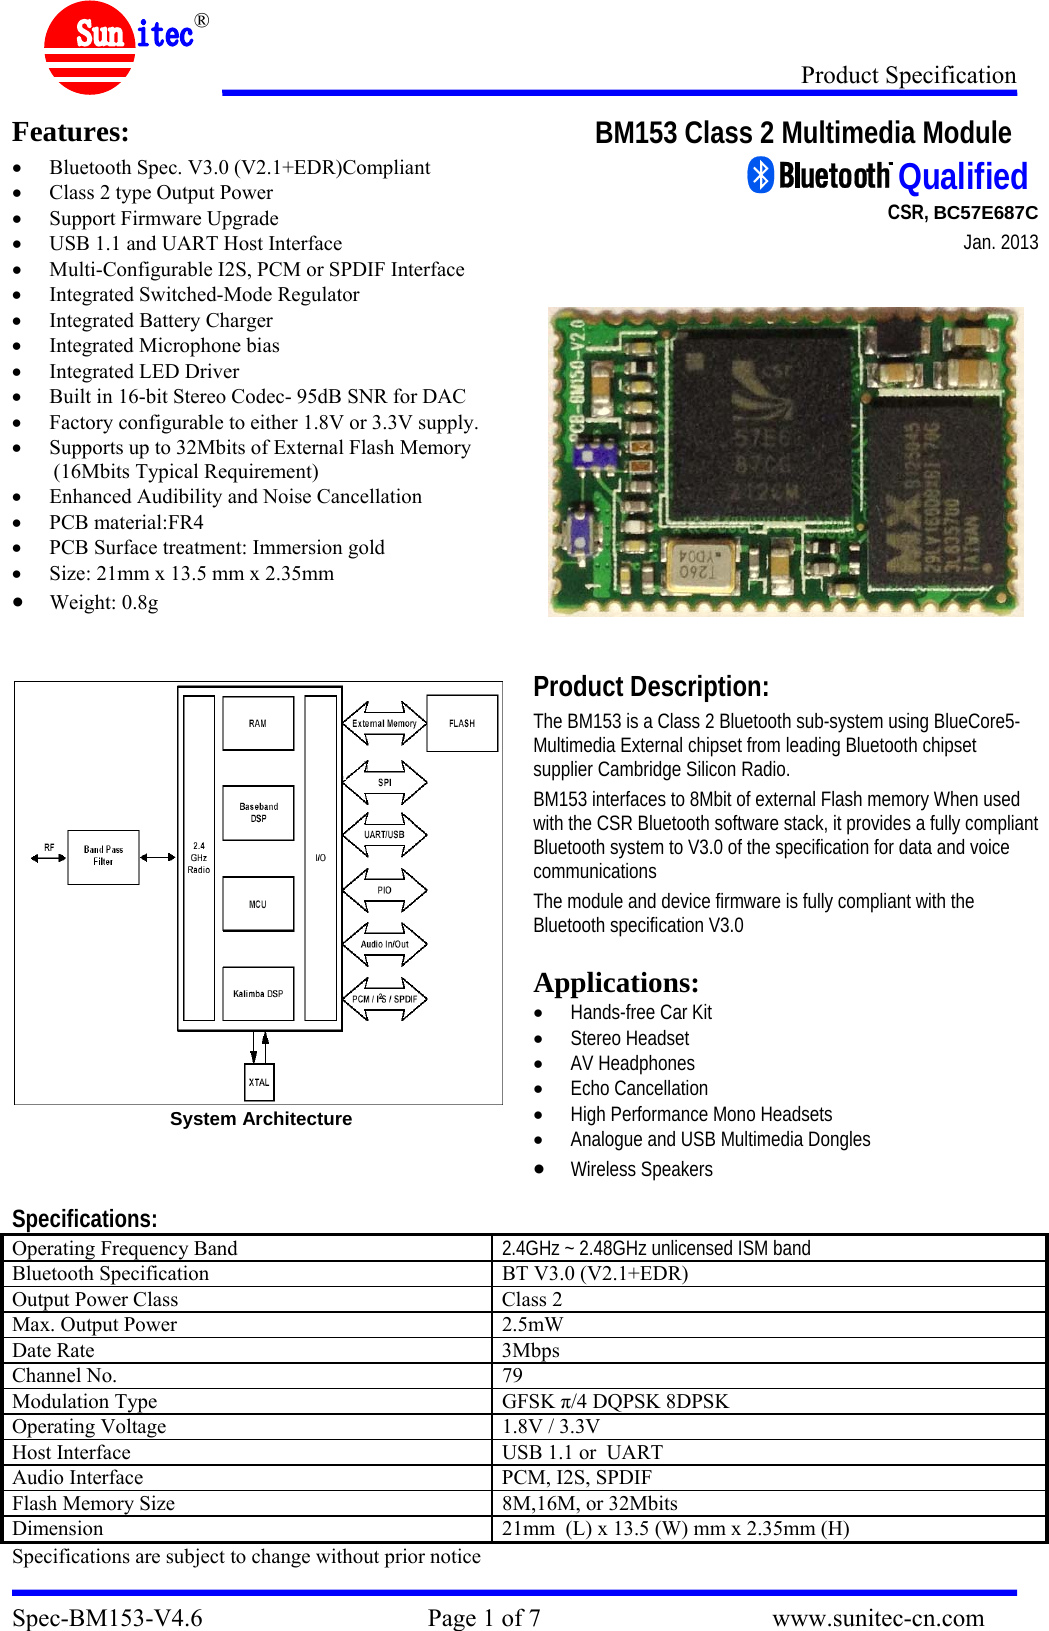 Product Specification Spec-BM153-V4.6                                    Page 1 of 7                                     www.sunitec-cn.com  ® Features: • Bluetooth Spec. V3.0 (V2.1+EDR)Compliant • Class 2 type Output Power • Support Firmware Upgrade • USB 1.1 and UART Host Interface • Multi-Configurable I2S, PCM or SPDIF Interface • Integrated Switched-Mode Regulator • Integrated Battery Charger • Integrated Microphone bias • Integrated LED Driver • Built in 16-bit Stereo Codec- 95dB SNR for DAC • Factory configurable to either 1.8V or 3.3V supply. • Supports up to 32Mbits of External Flash Memory (16Mbits Typical Requirement) • Enhanced Audibility and Noise Cancellation  • PCB material:FR4 • PCB Surface treatment: Immersion gold • Size: 21mm x 13.5 mm x 2.35mm • Weight: 0.8g   System Architecture  BM153 Class 2 Multimedia Module                                                                                         CSR, BC57E687C                           Jan. 2013      Product Description: The BM153 is a Class 2 Bluetooth sub-system using BlueCore5-Multimedia External chipset from leading Bluetooth chipset supplier Cambridge Silicon Radio.  BM153 interfaces to 8Mbit of external Flash memory When used with the CSR Bluetooth software stack, it provides a fully compliant Bluetooth system to V3.0 of the specification for data and voice communications  The module and device firmware is fully compliant with the Bluetooth specification V3.0  Applications: • Hands-free Car Kit • Stereo Headset • AV Headphones • Echo Cancellation • High Performance Mono Headsets • Analogue and USB Multimedia Dongles •Wireless Speakers Specifications: Operating Frequency Band  2.4GHz ~ 2.48GHz unlicensed ISM band Bluetooth Specification  BT V3.0 (V2.1+EDR) Output Power Class  Class 2 Max. Output Power  2.5mW Date Rate  3Mbps Channel No.  79 Modulation Type  GFSK π/4 DQPSK 8DPSK Operating Voltage  1.8V / 3.3V Host Interface  USB 1.1 or  UART Audio Interface  PCM, I2S, SPDIF Flash Memory Size  8M,16M, or 32Mbits Dimension  21mm  (L) x 13.5 (W) mm x 2.35mm (H) Specifications are subject to change without prior notice  Qualified 